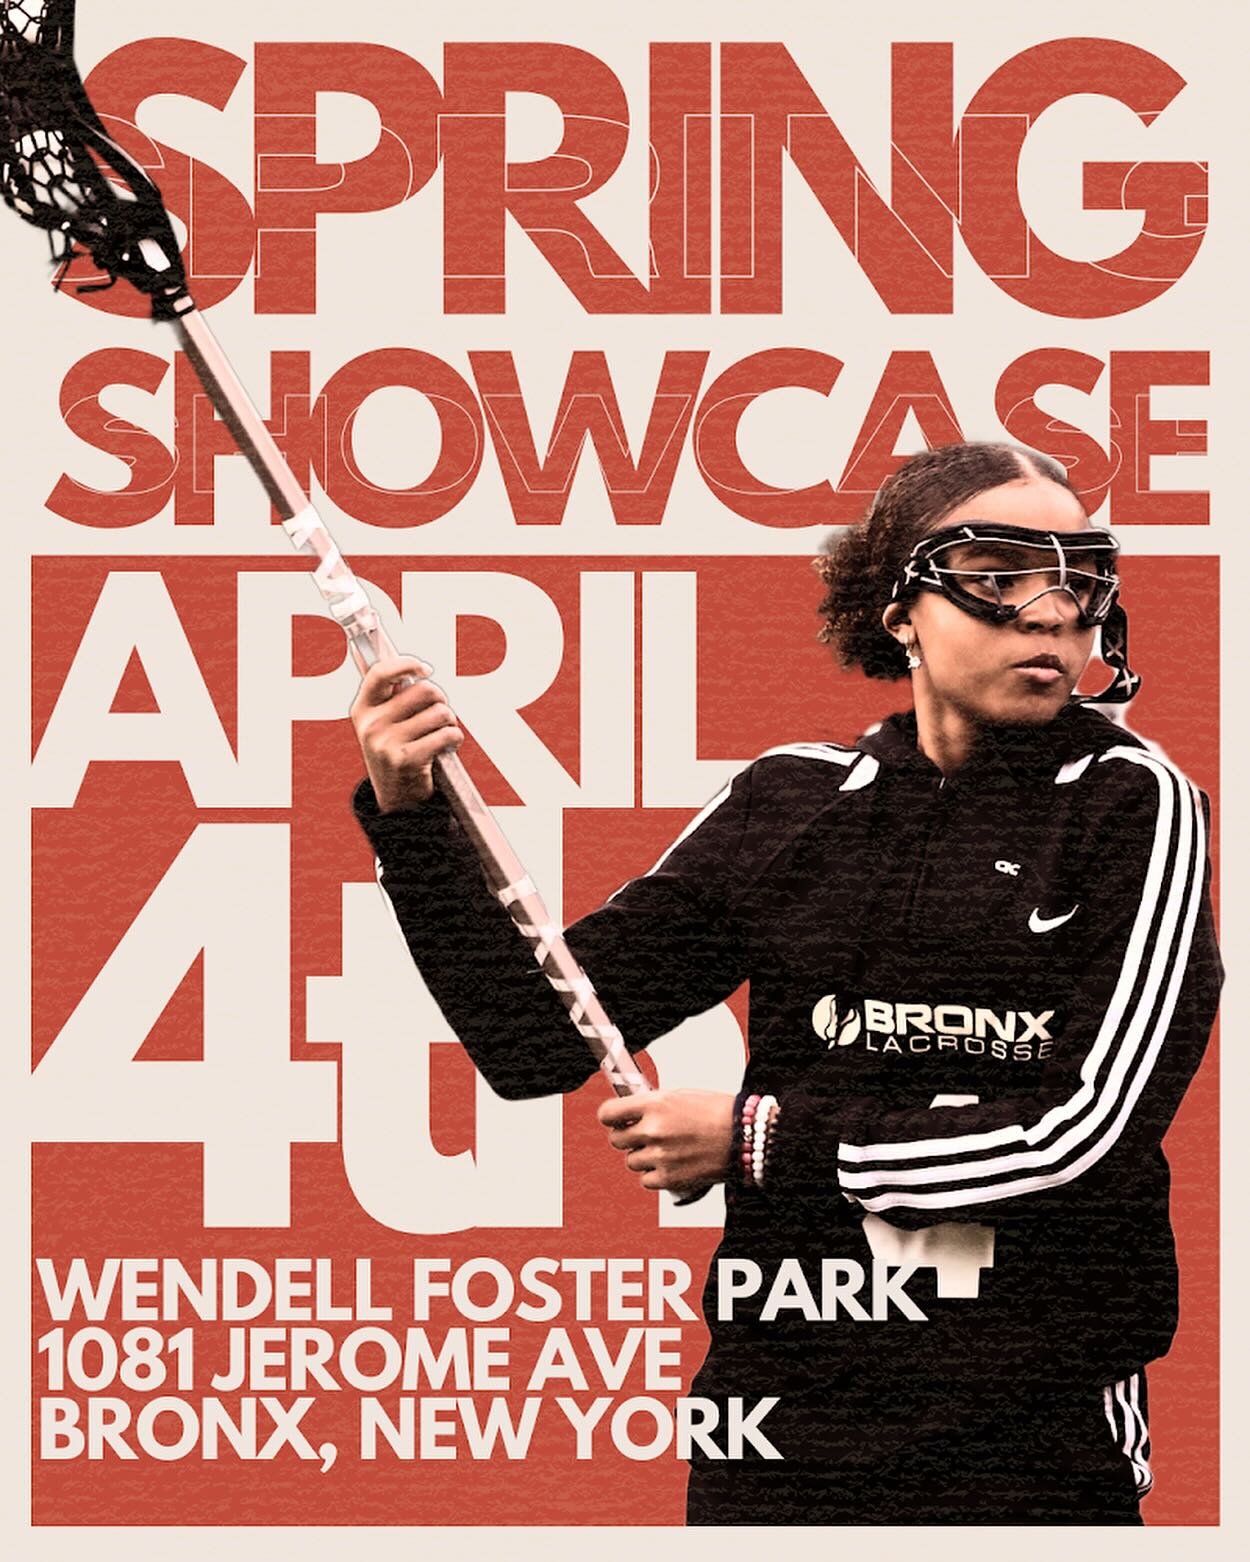 Girls Spring Showcase is here! Come support our Student-Athletes 📚🥍 and see with your own eyes our talented Bronx Lacrosse Girls battle it out against each other. The Games will start at 3:30 on April 4th. Family, Friends, and All are invited to co